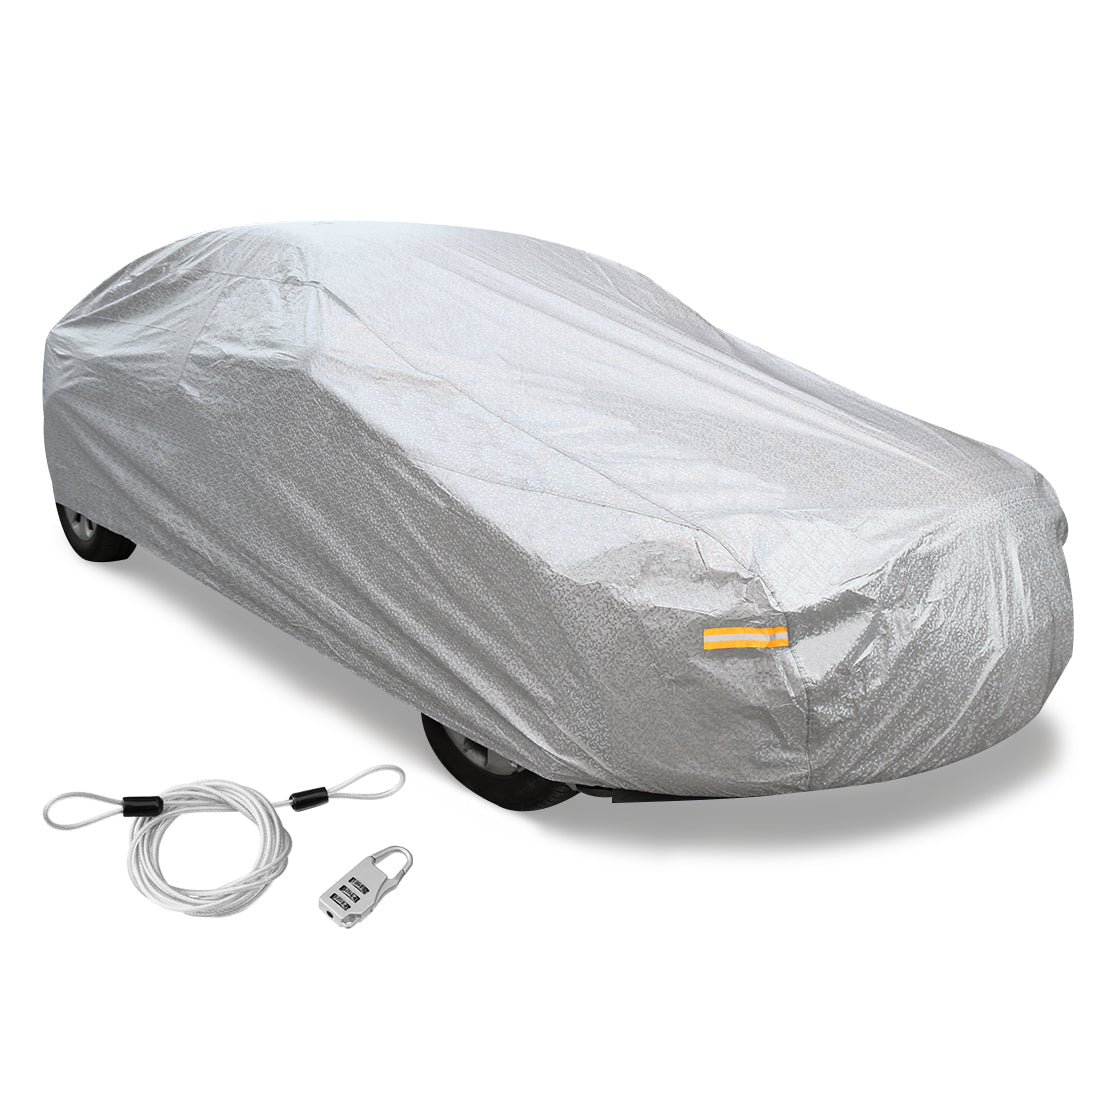 uxcell Uxcell Soft Aluminum Car Cover Outdoor All Weather Rain Snow Heat Resistant